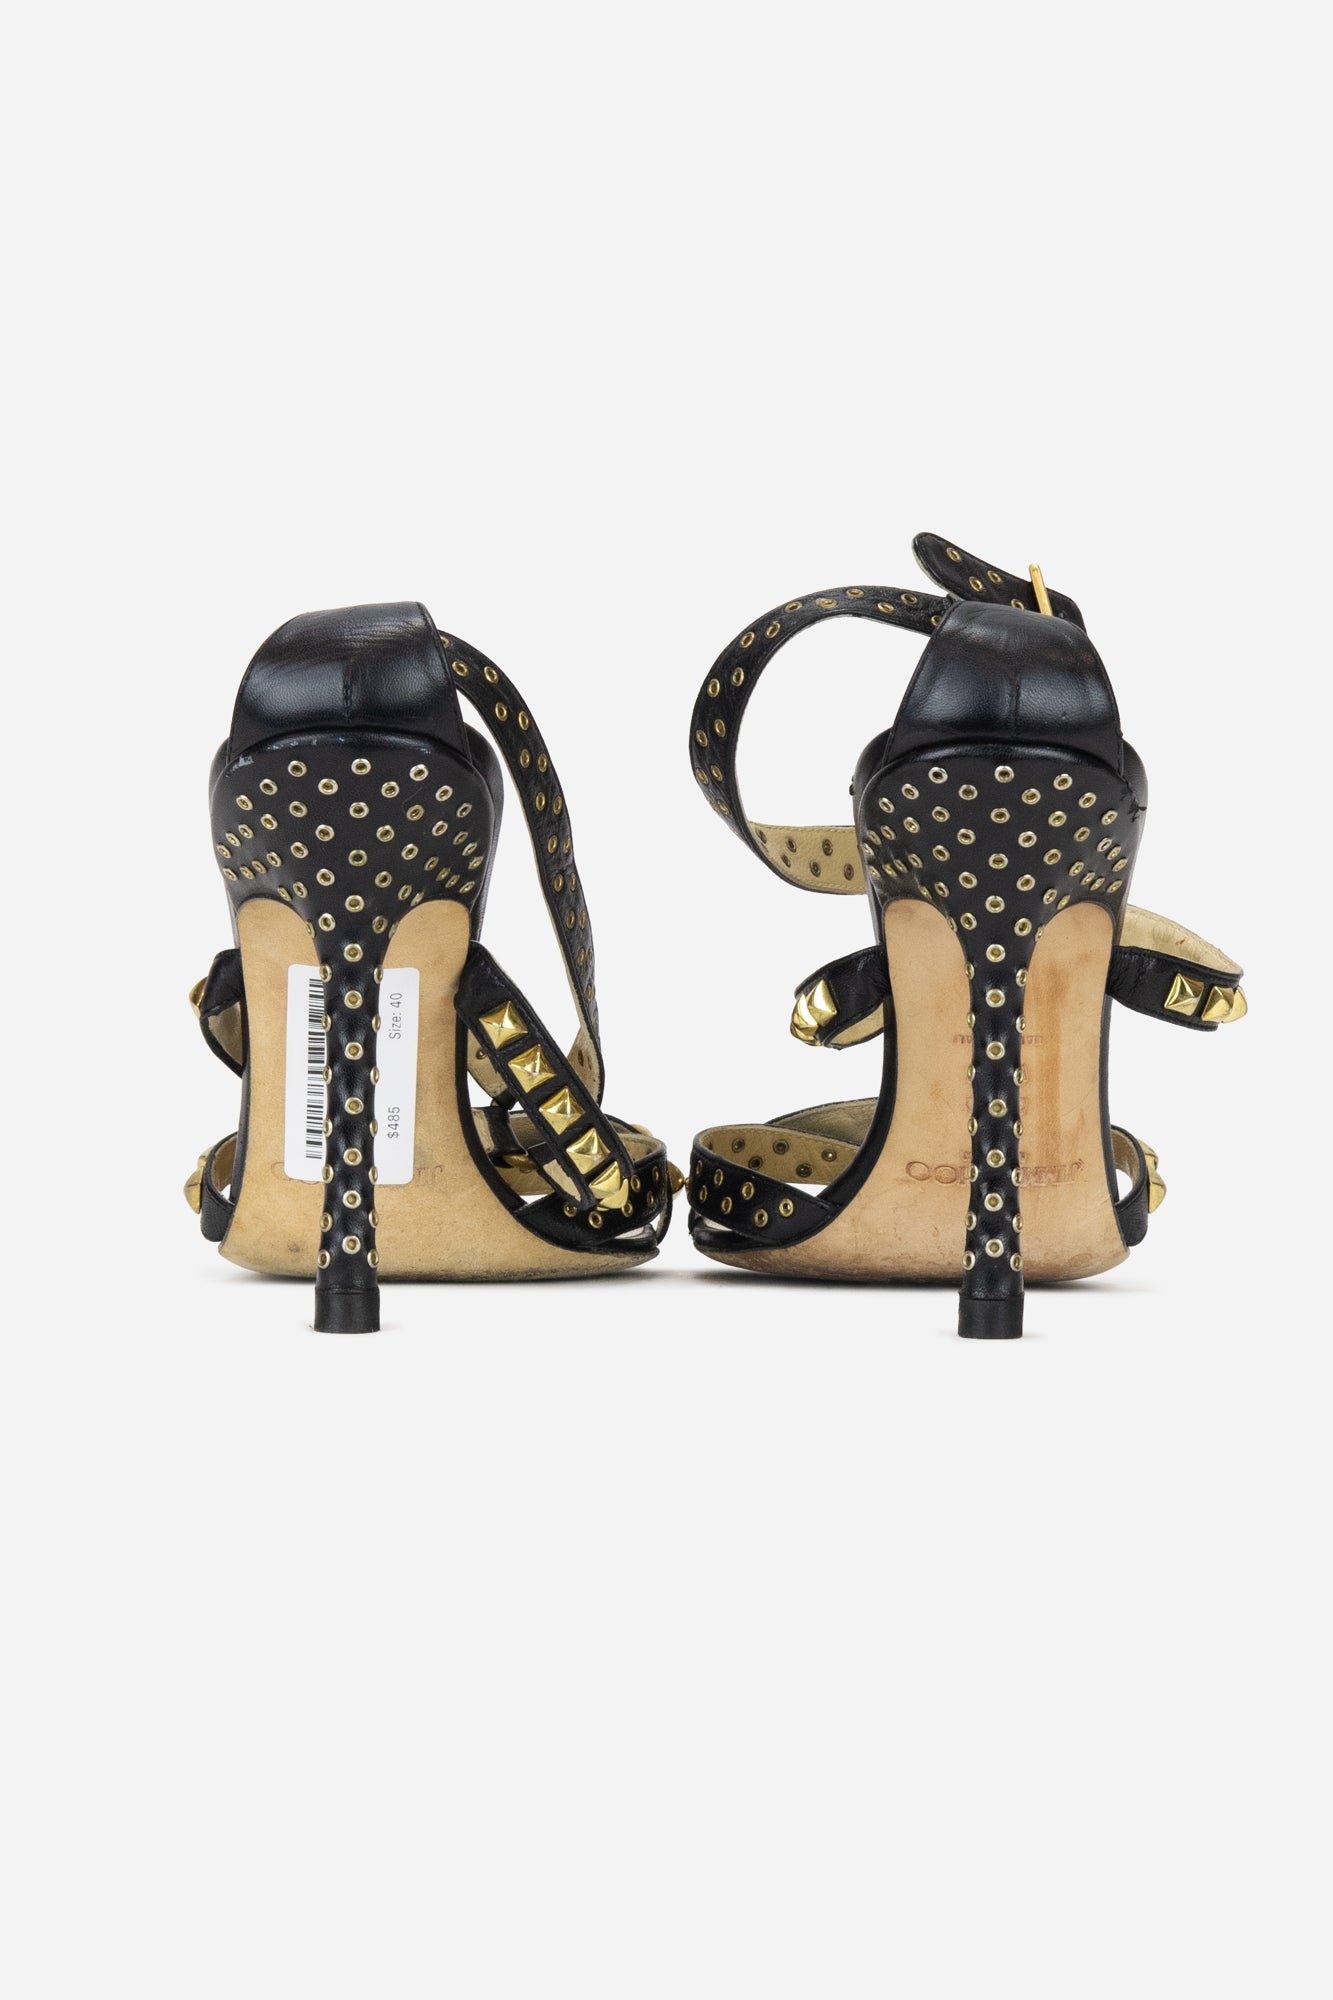 Black Leather Strappy Sandals with Gold Studded Details